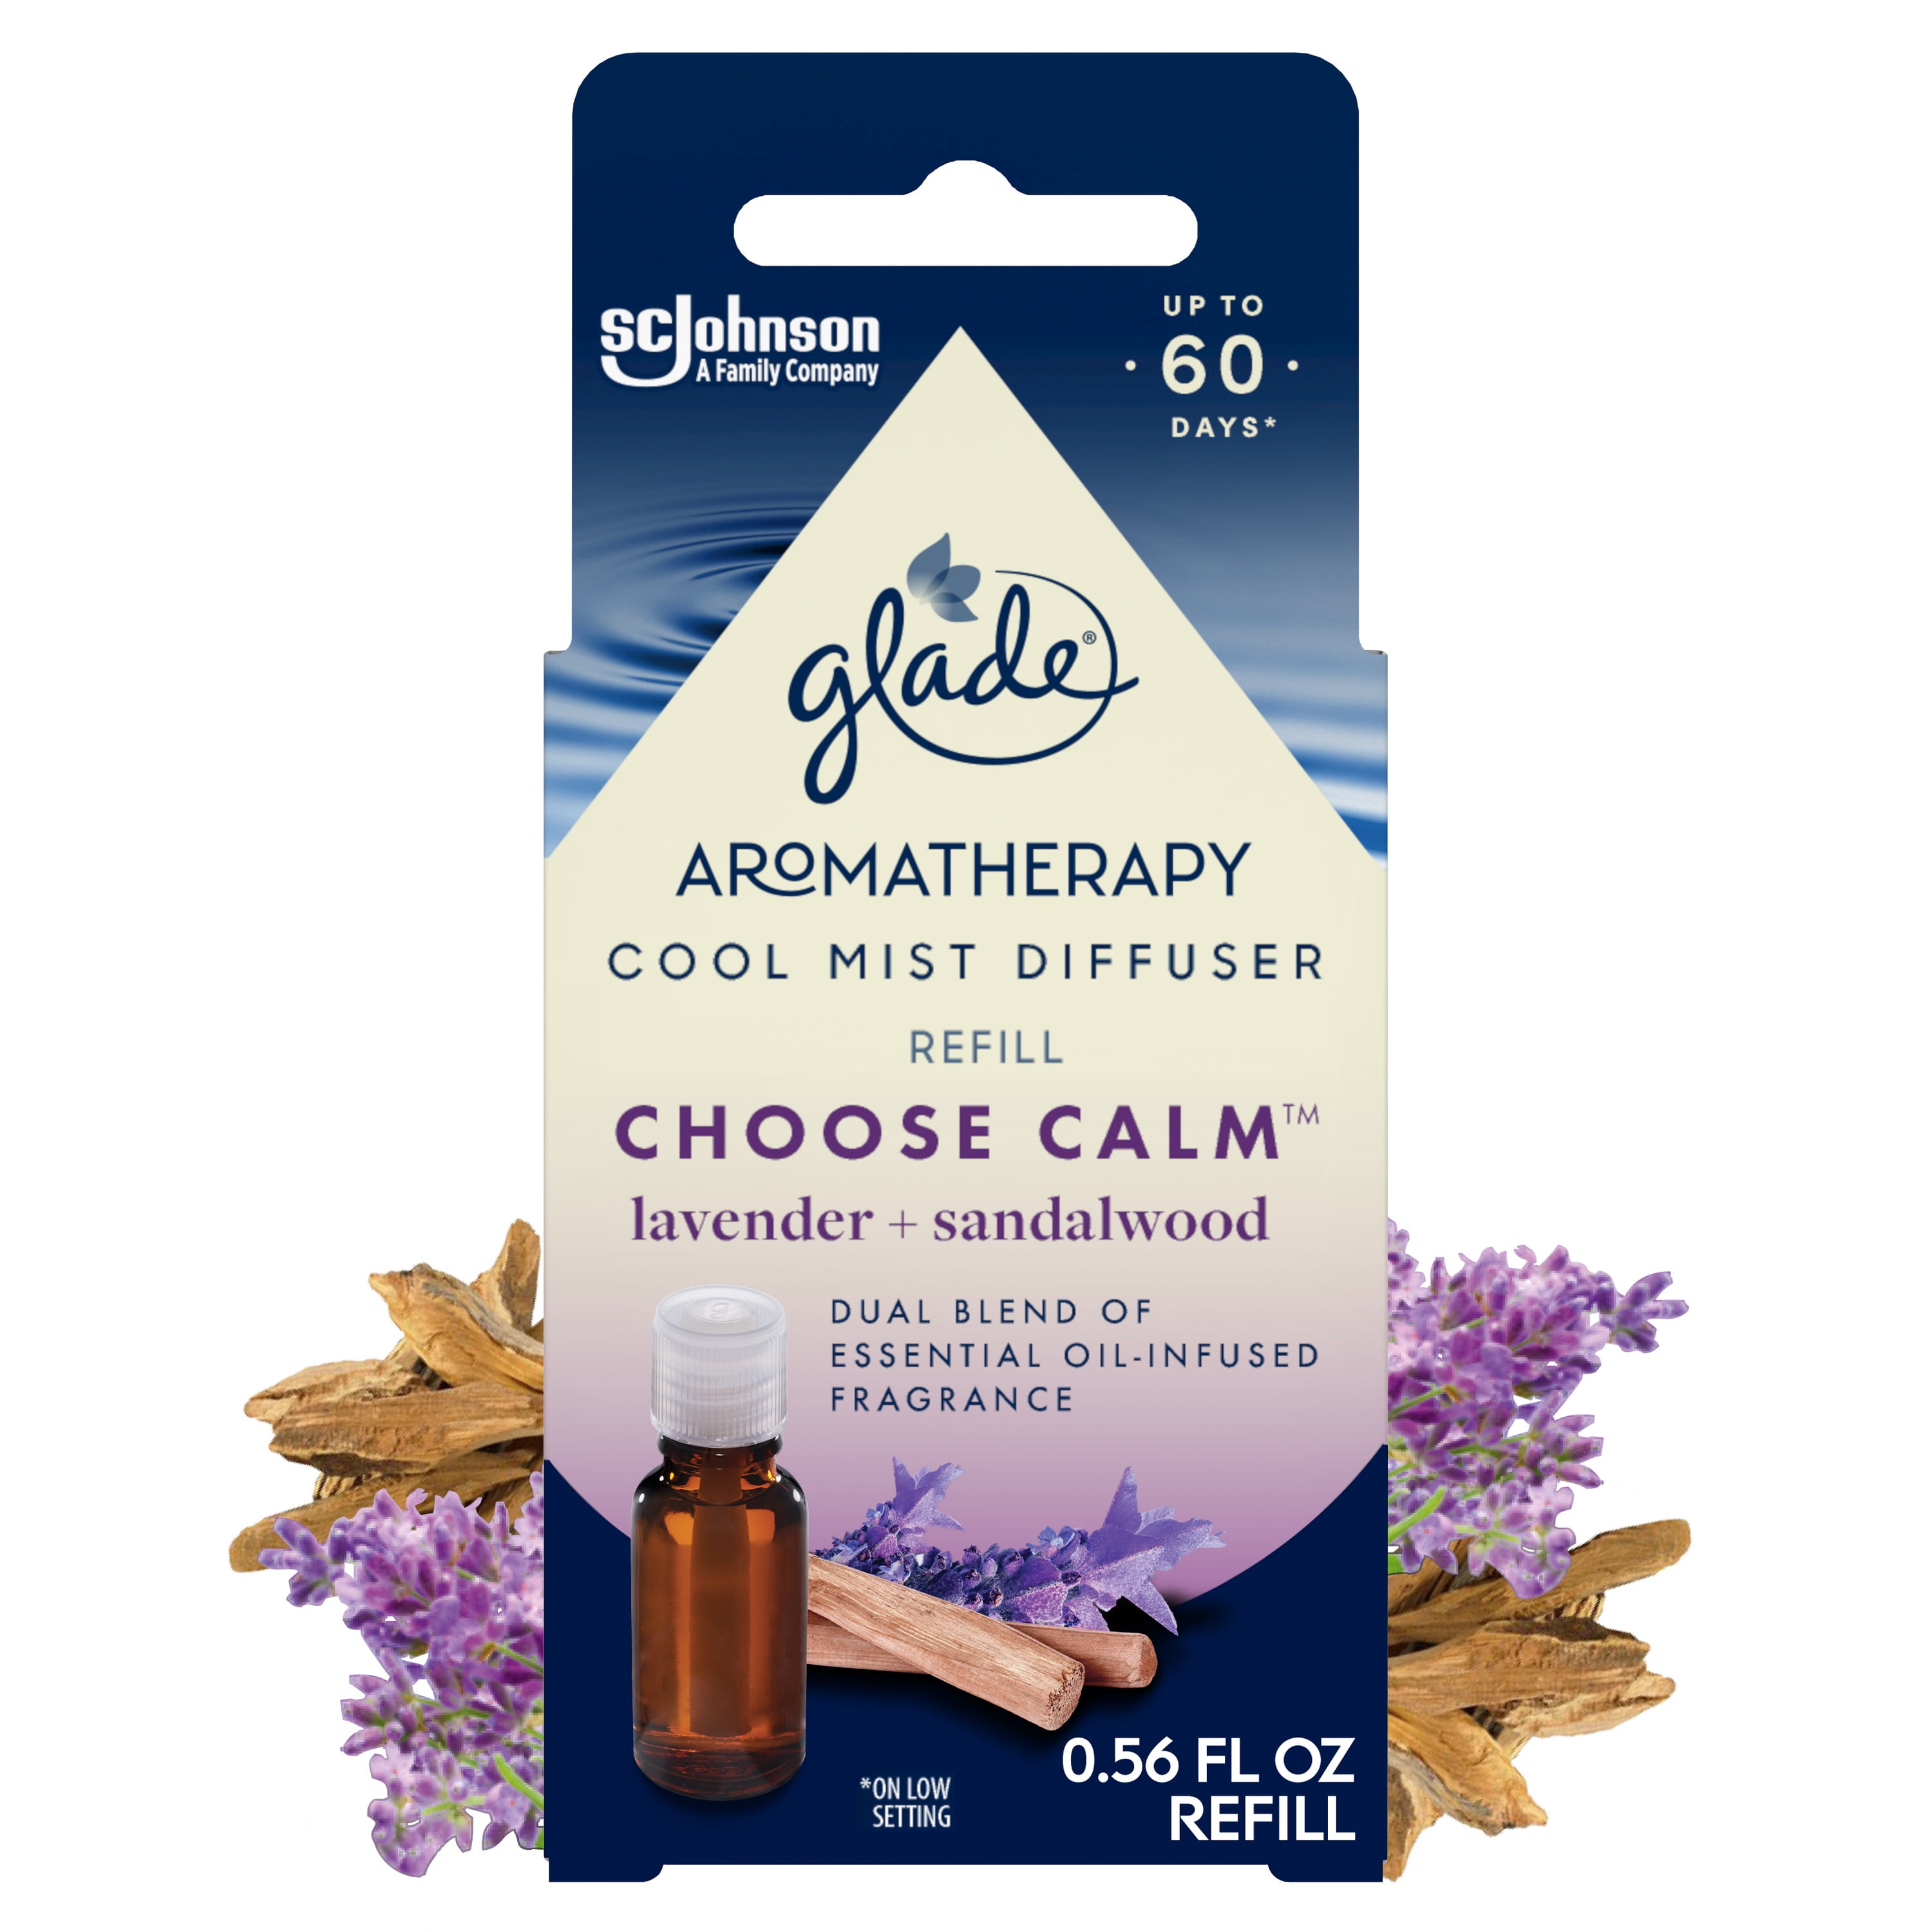 Glade Essential Oil Diffuser Refill, Choose Calm Scentwith Notes of Lavender & Sandalwood, 0.56 oz (16.8 ml), for Use with Cool MistAromatherapy Diffuser & Air Freshener for Home